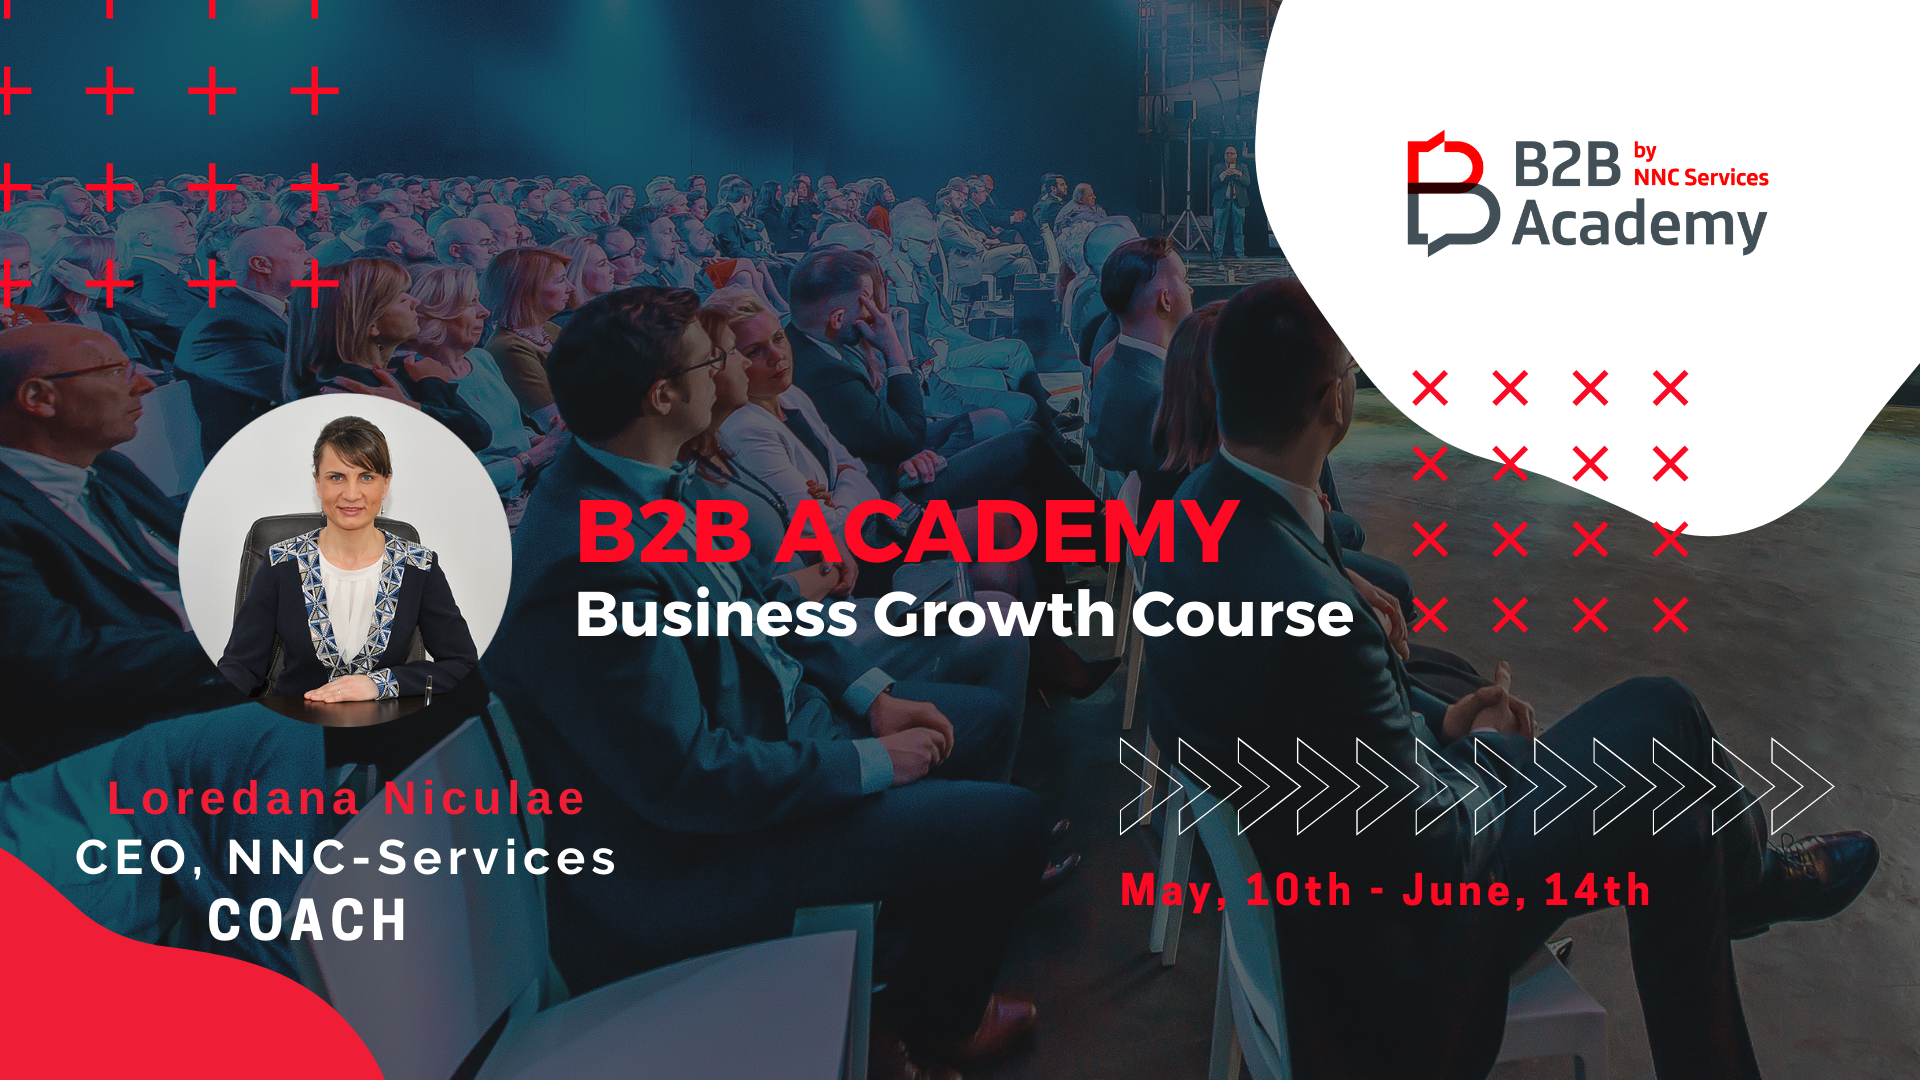 B2B Business Growth Course - Marketing Strategy 2022 - NNC Services